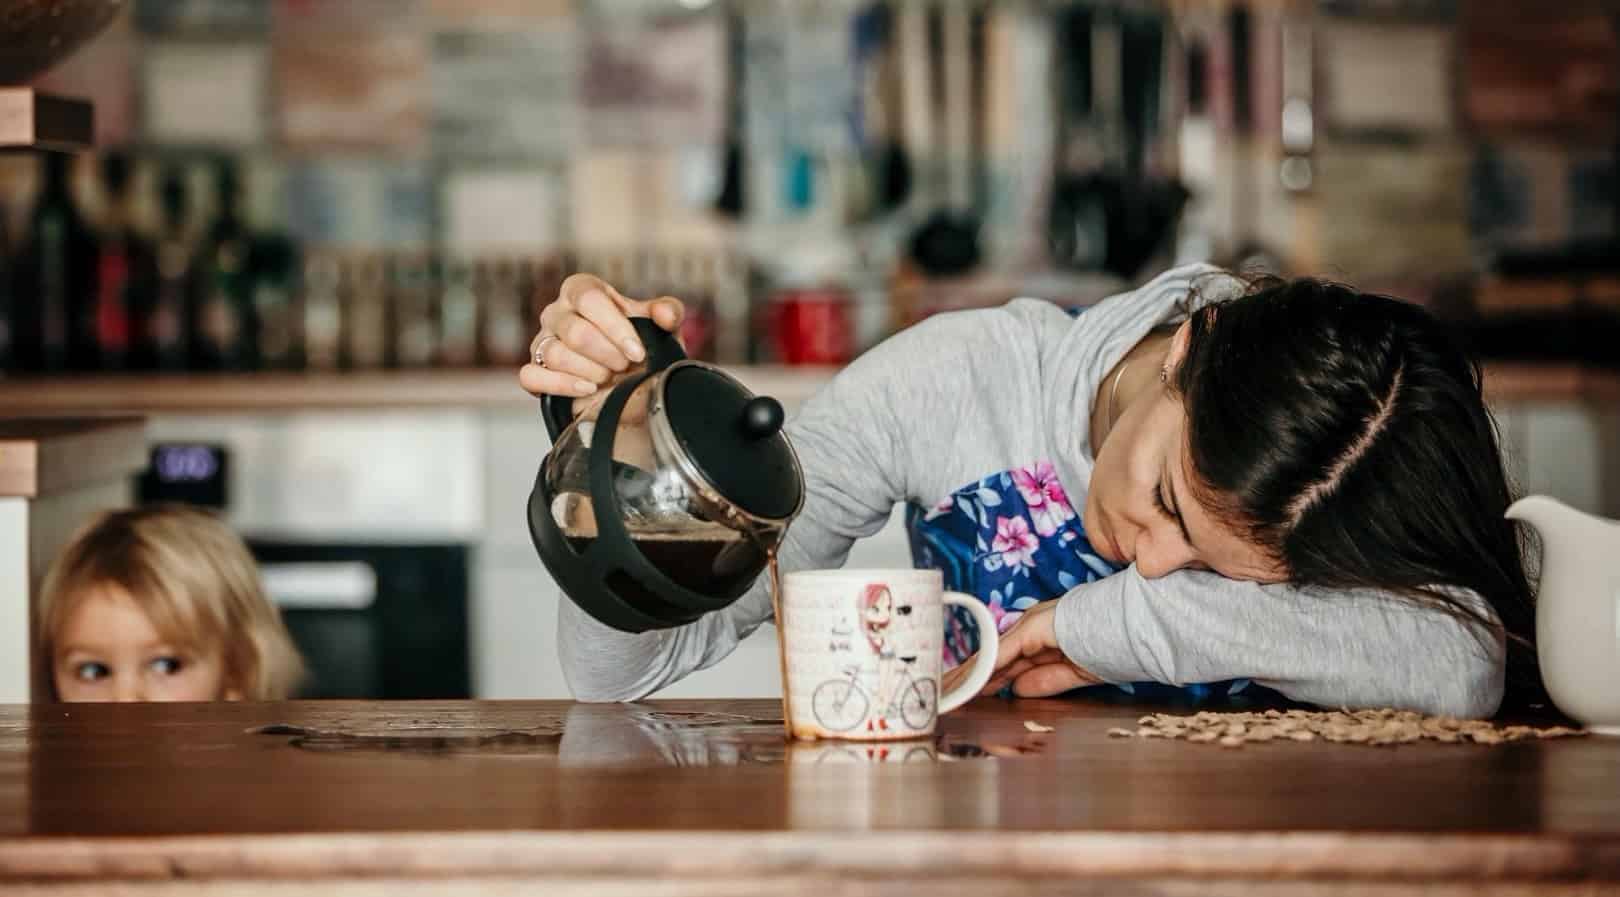 An exhausted woman lays her head down as she pours coffee onto the table, missing her mug entirely.